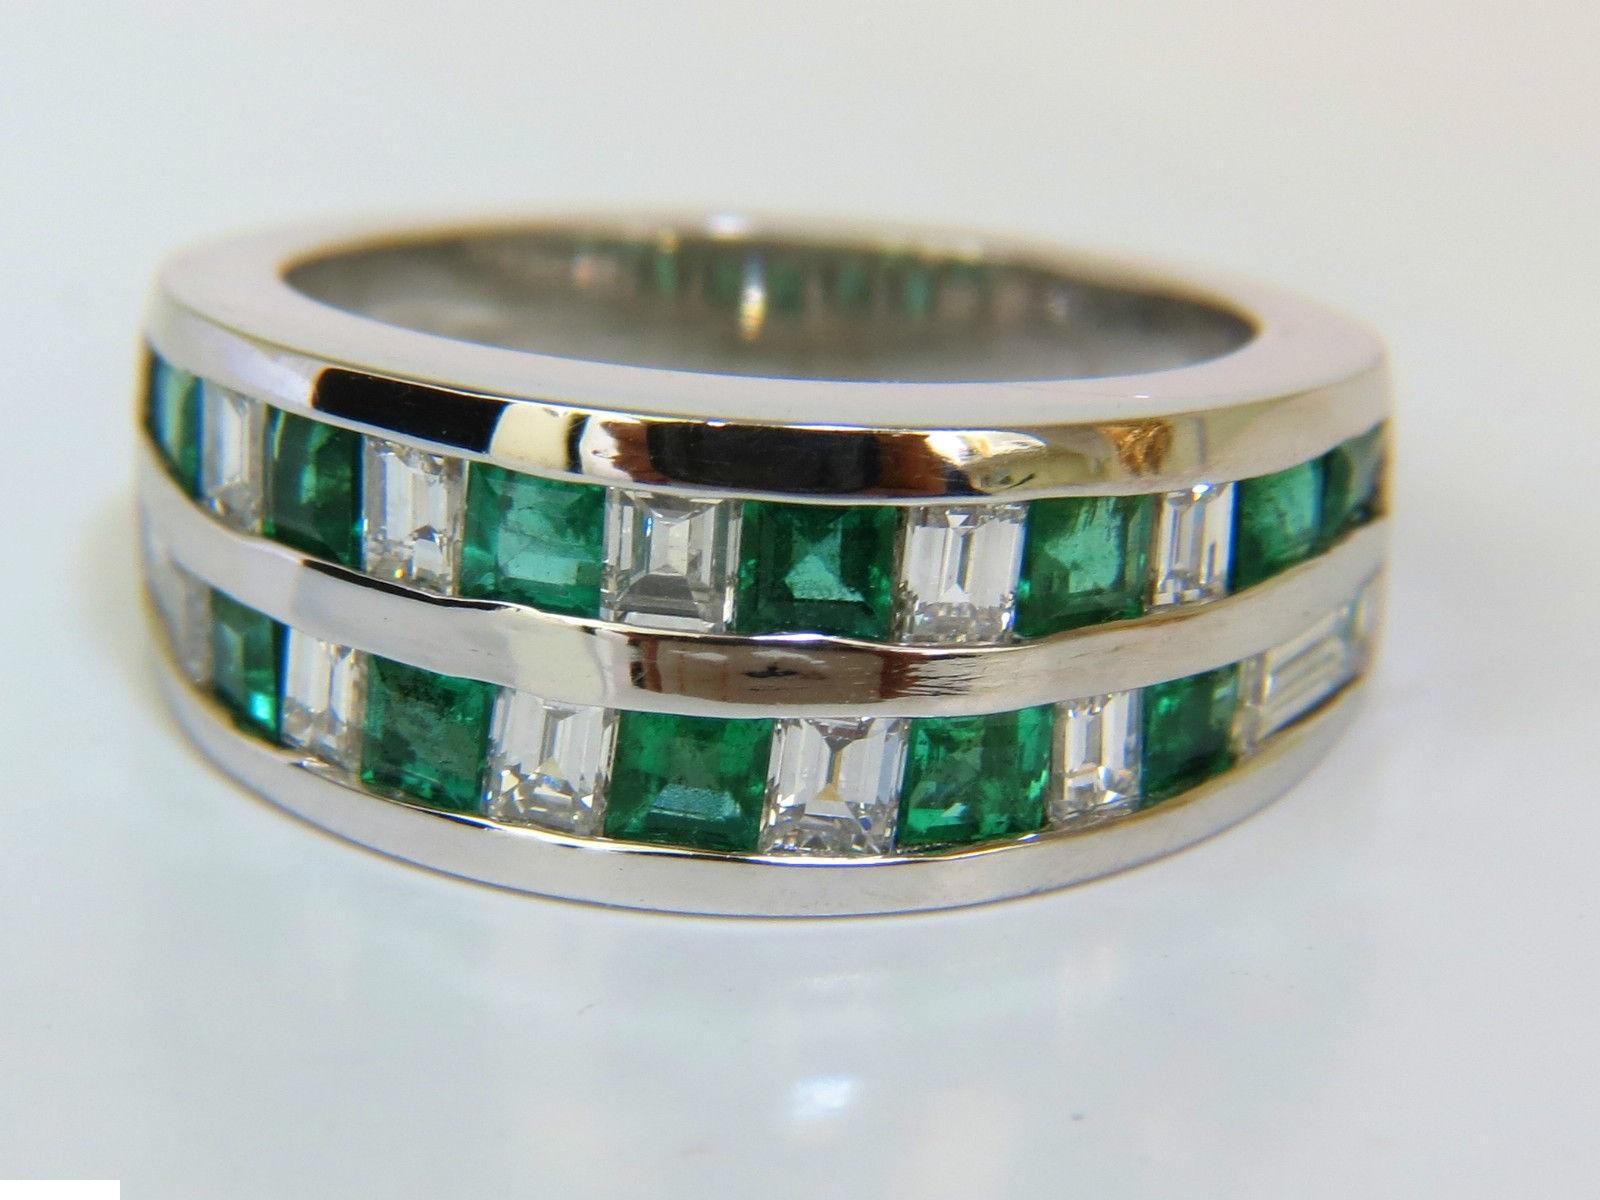 Platinum Classic

The 2-row modern band

1.80ct. Natural Emeralds

Vivid Green VS Clarity.

2.00ct. Diamonds: Vs-1 clarity, F-color.

Item: 15.9gms.

9.00mm thick

4.60mm (from skin to top of ring)

$6600 Appraisal to Accompany

Current size: 7

It